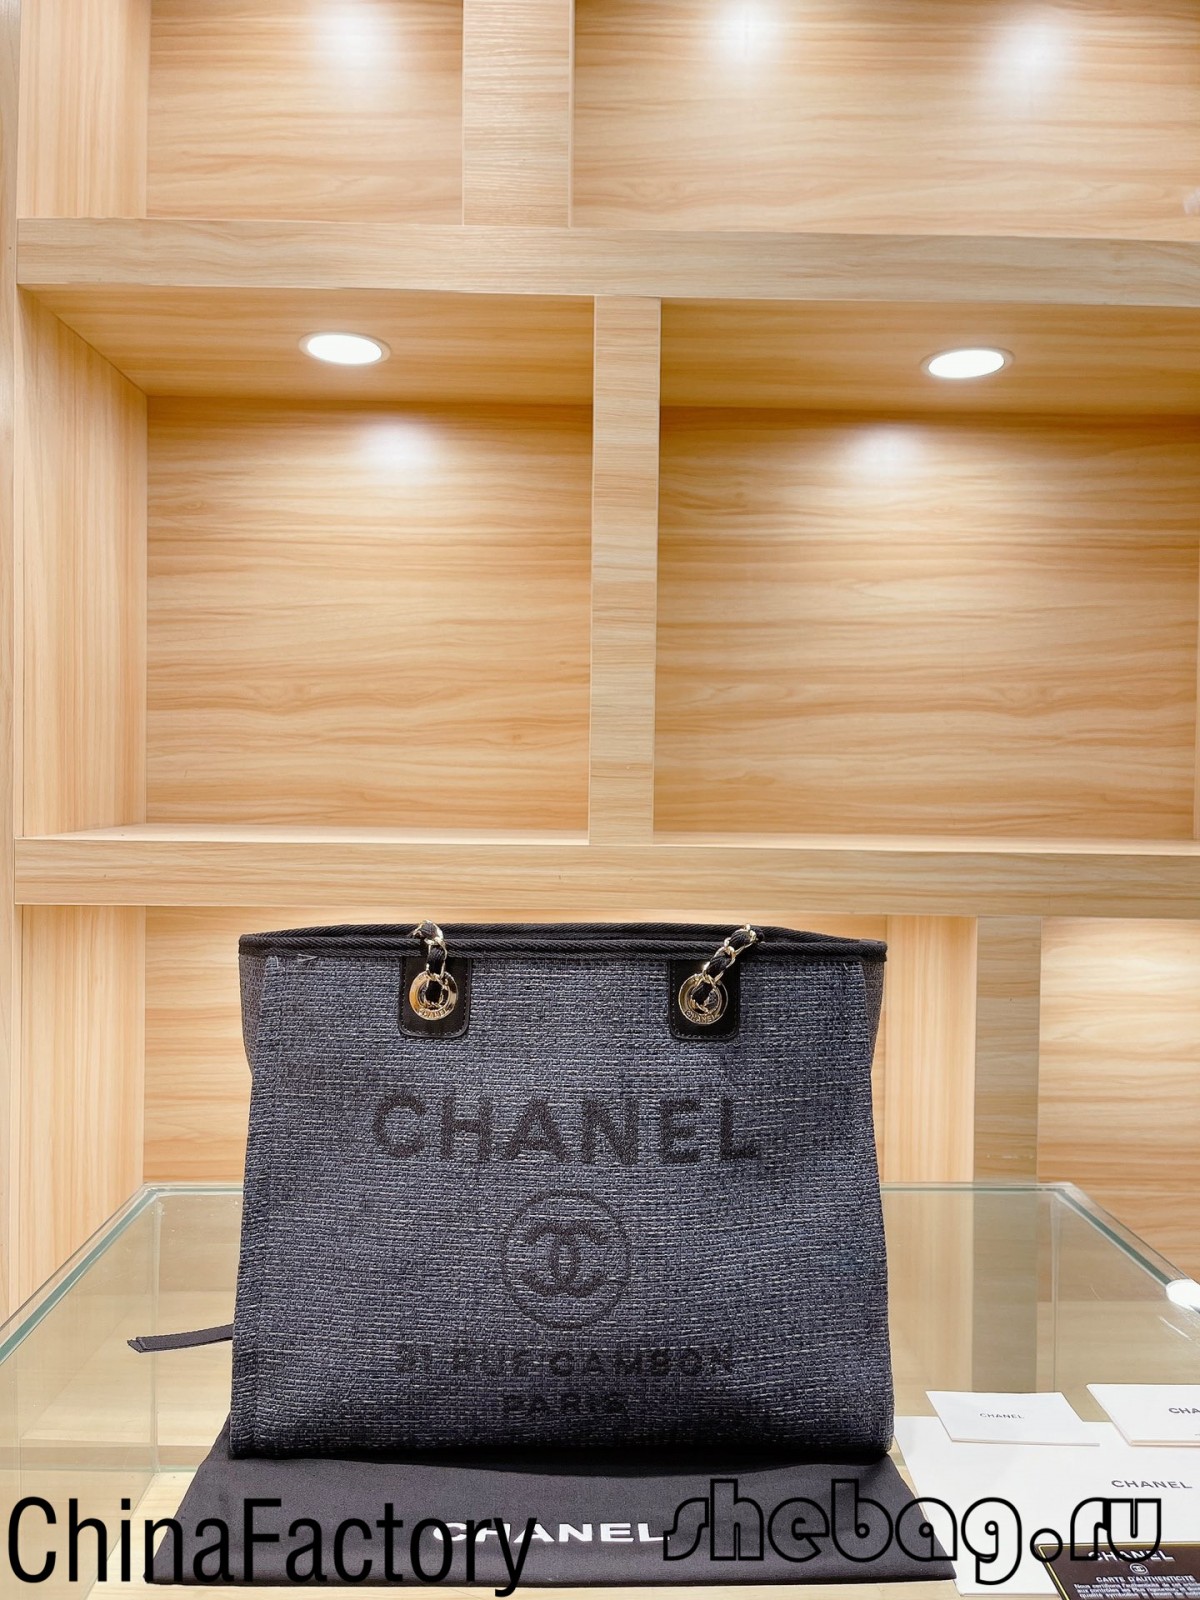 Chanel Deauville Canvas Tote Bag Replica Thok seller Repference (2022 Hottest)-Best Quality Fake Louis Vuitton Bag آن لائن اسٽور، Replica designer bag ru